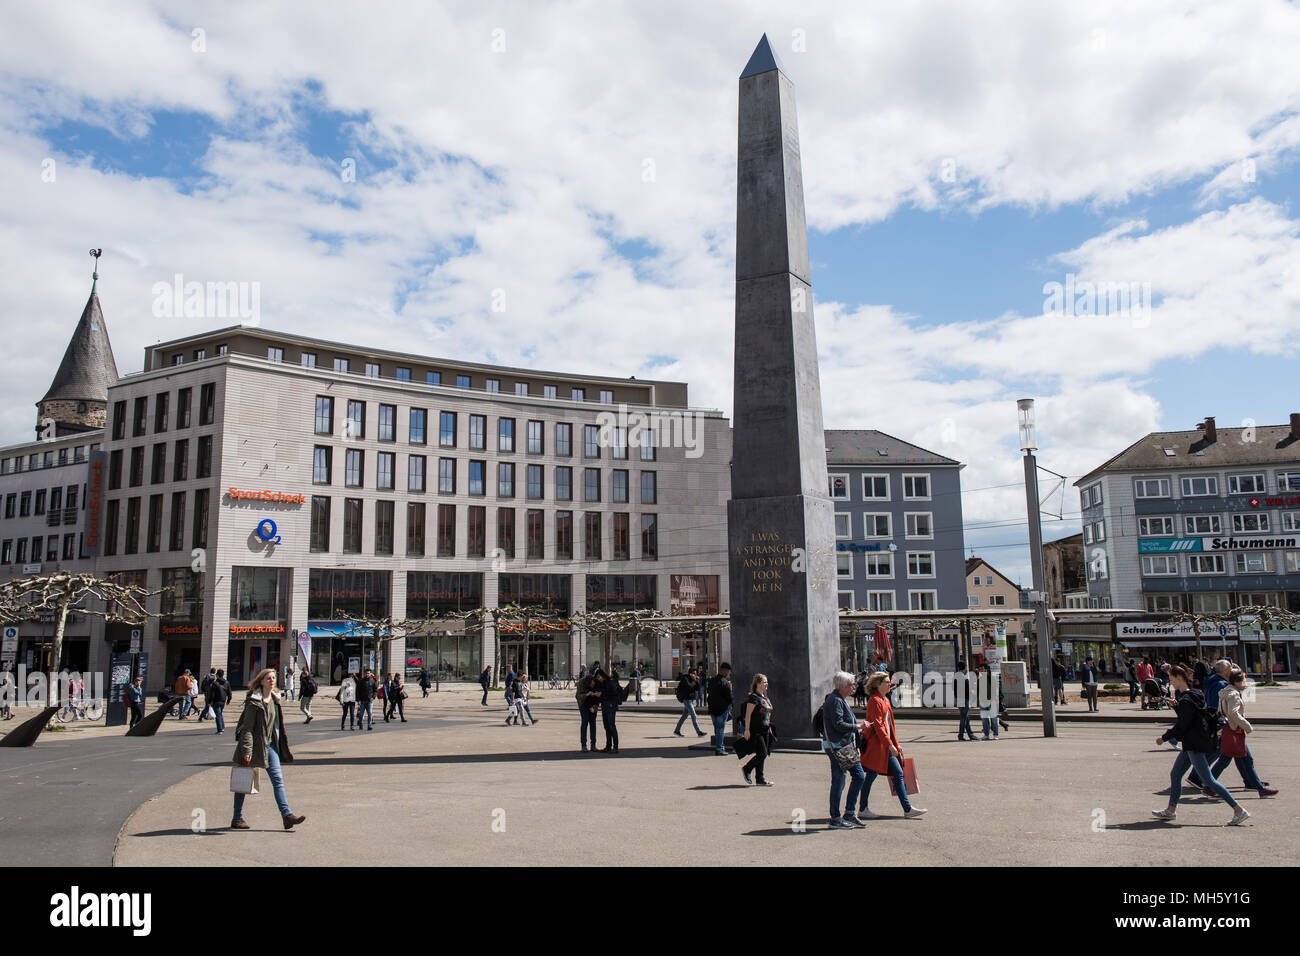 30 April 2018, Germany, Kassel: The artwork of the documenta 14, an about  16-metre-tall obelisk by US artist Olu Oguibe at the Koenigsplatz (lit.  King's square) in Kassel. The fundraising campaign of